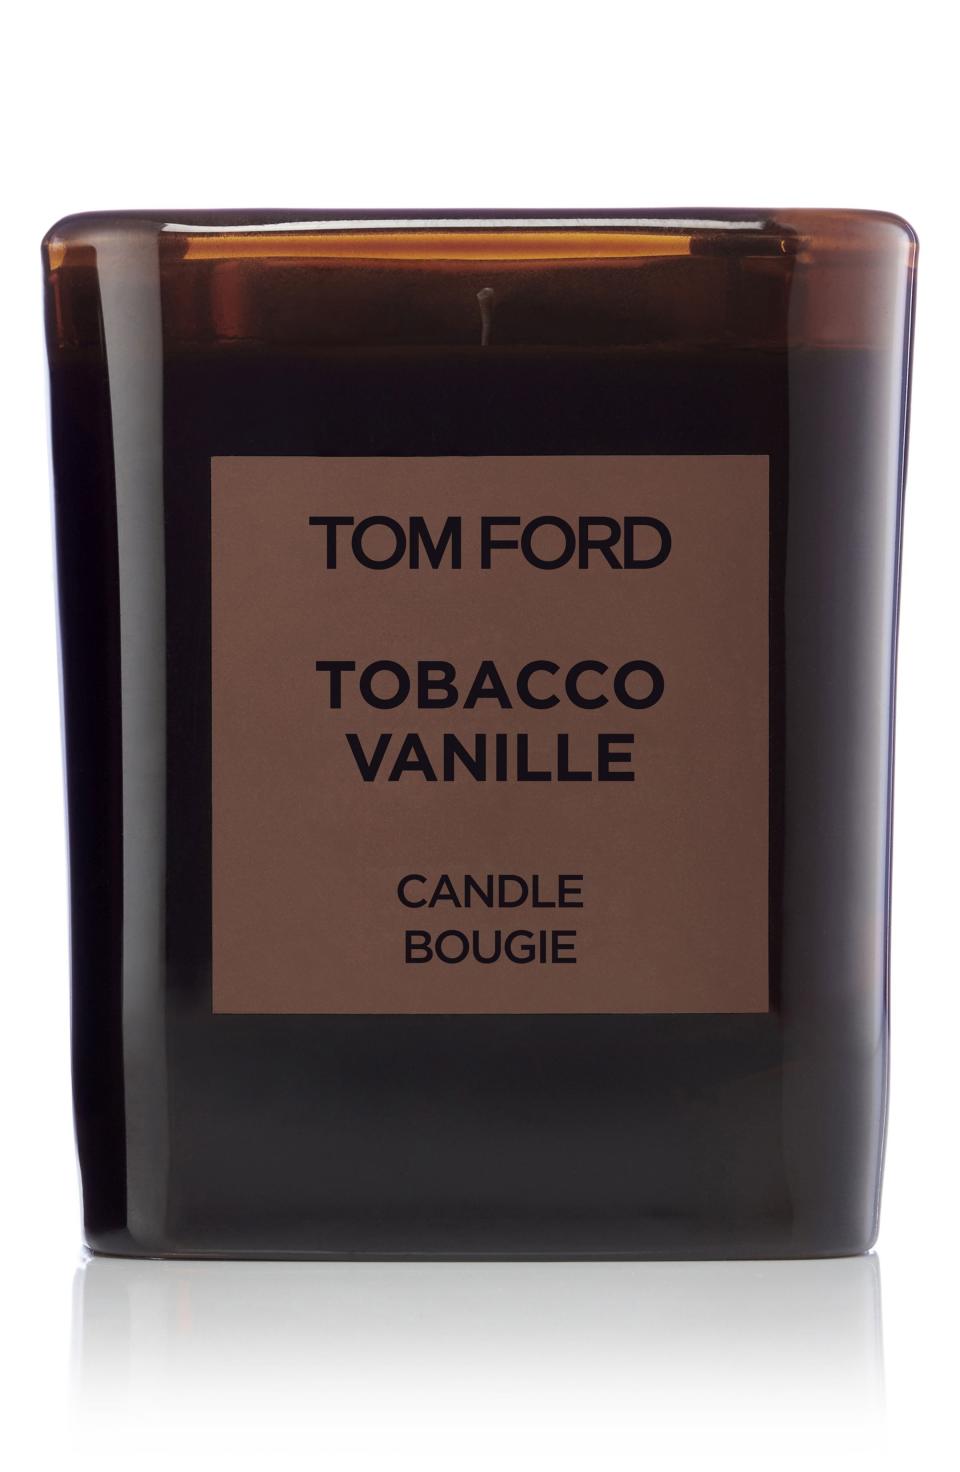 Tom Ford Private Blend Tobacco Vanille Candle